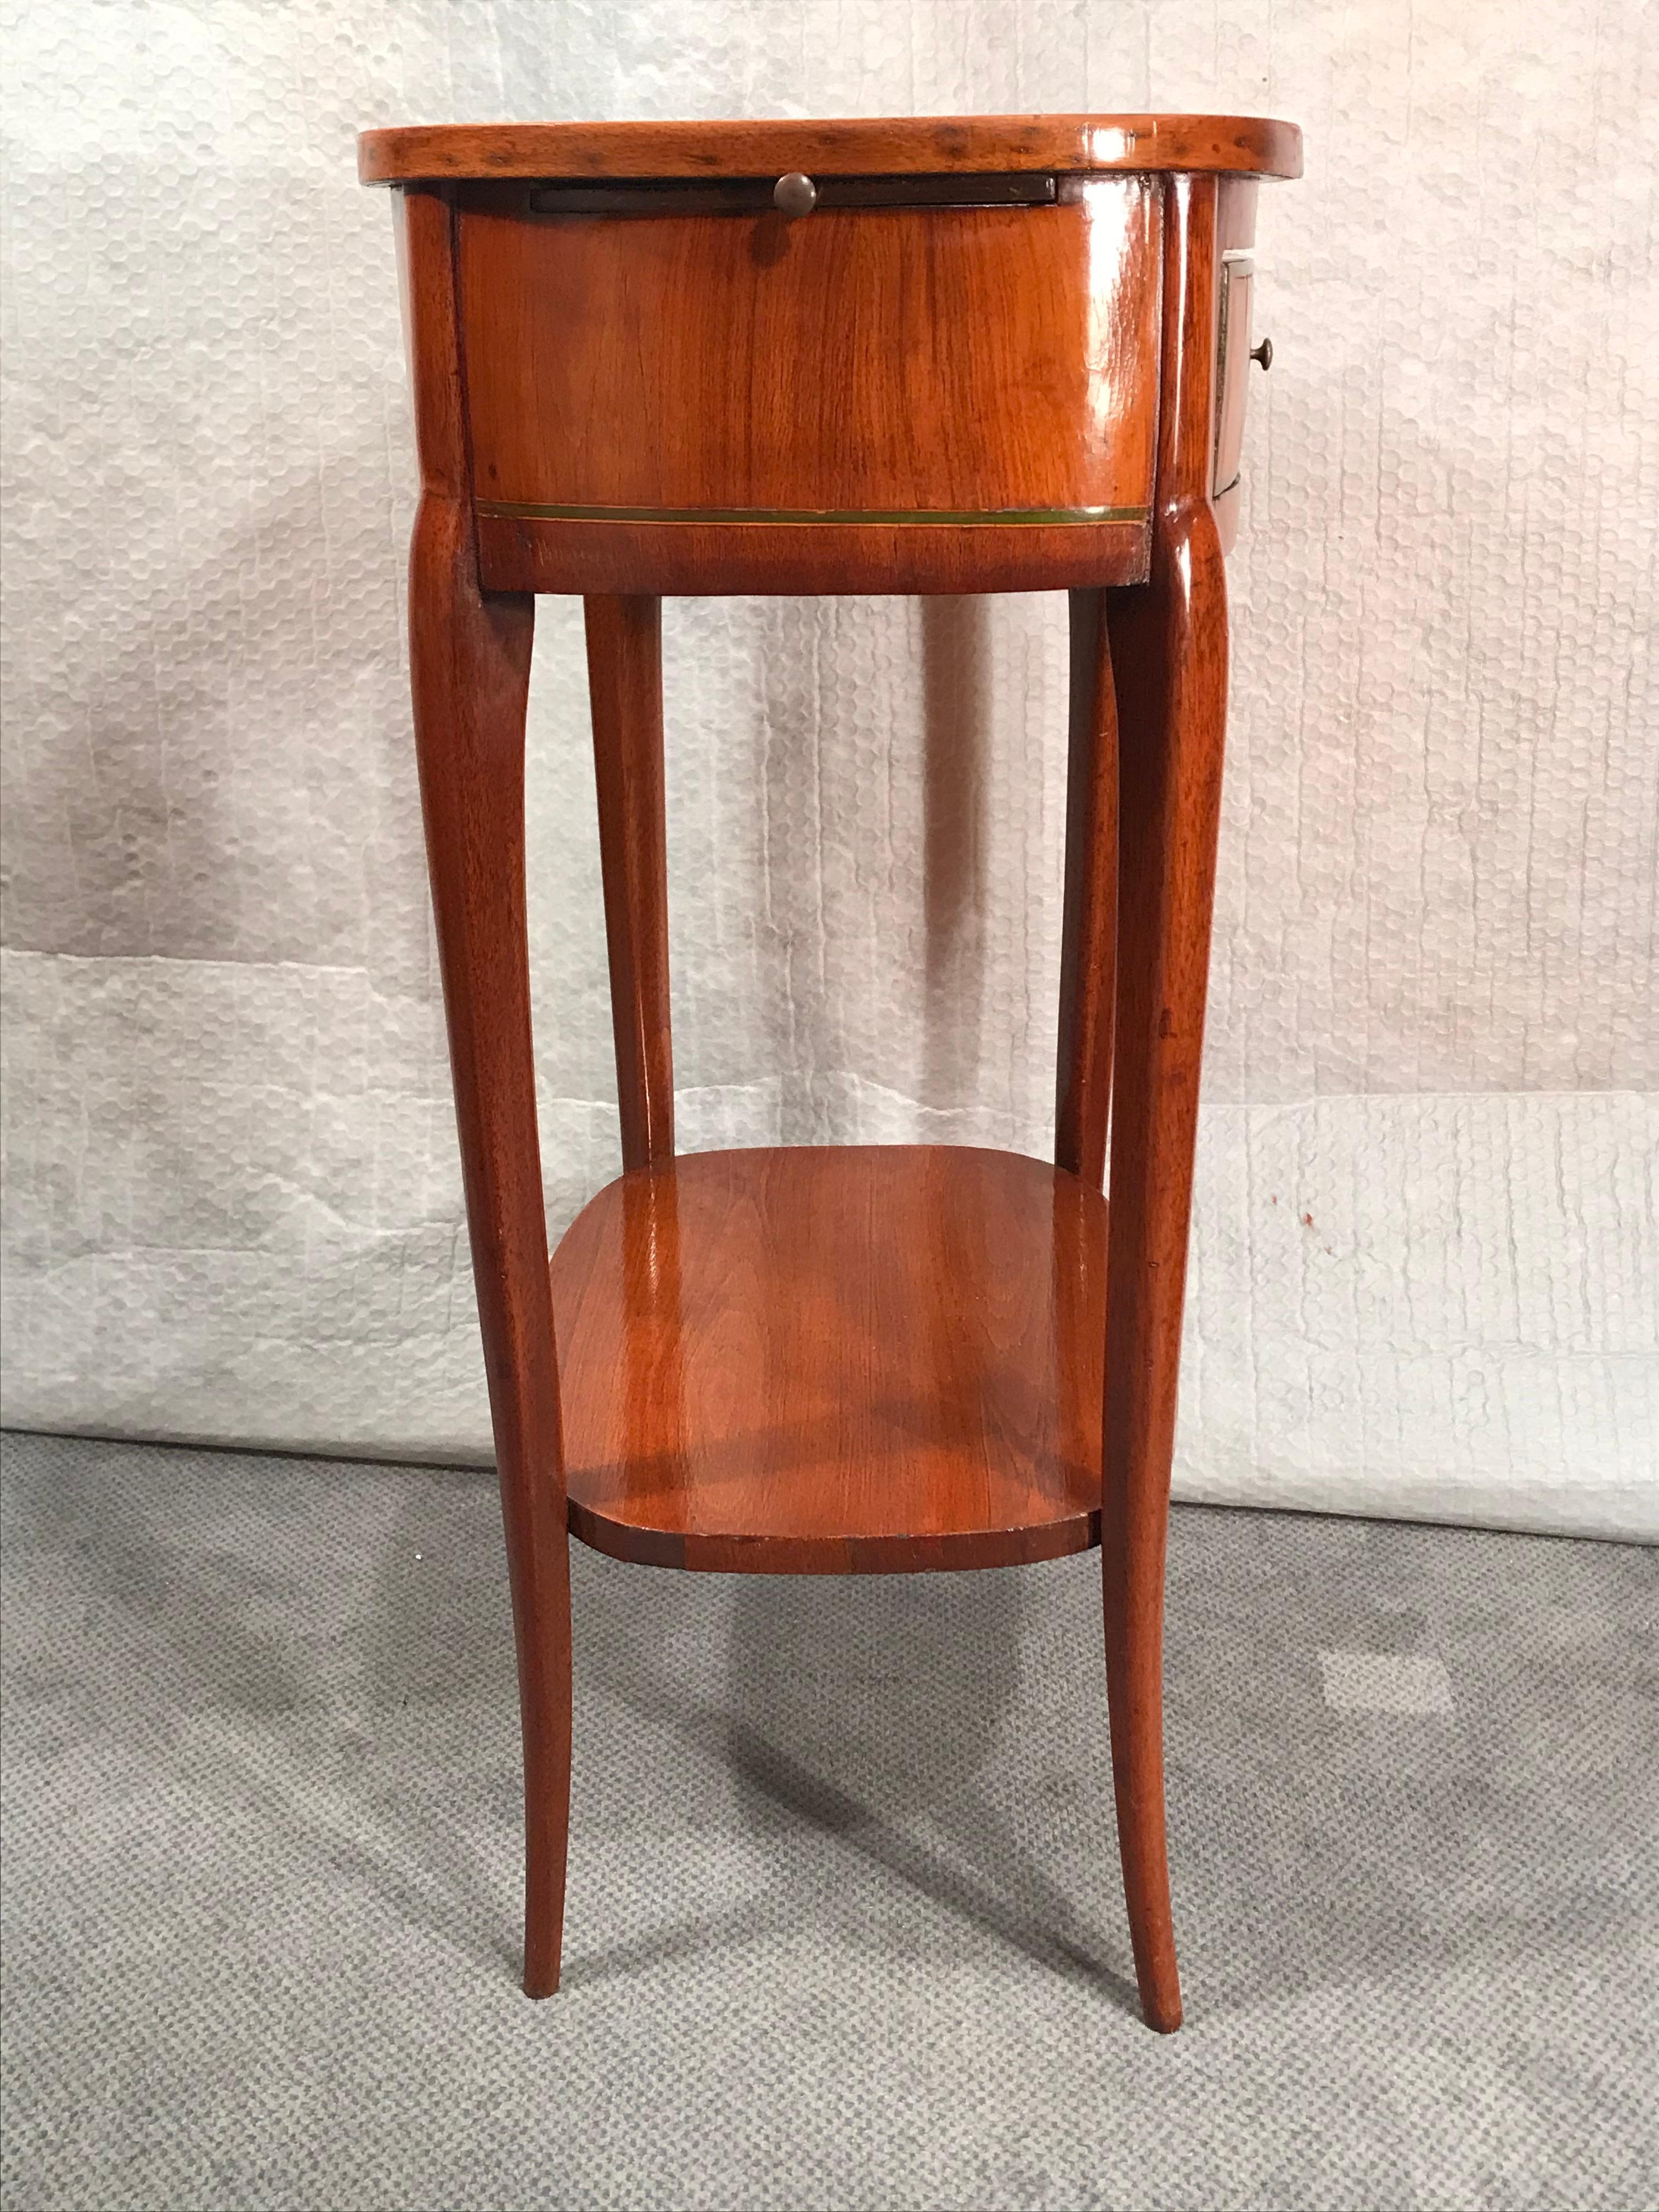 Mahogany Side Table, French Restauration Style, 1820